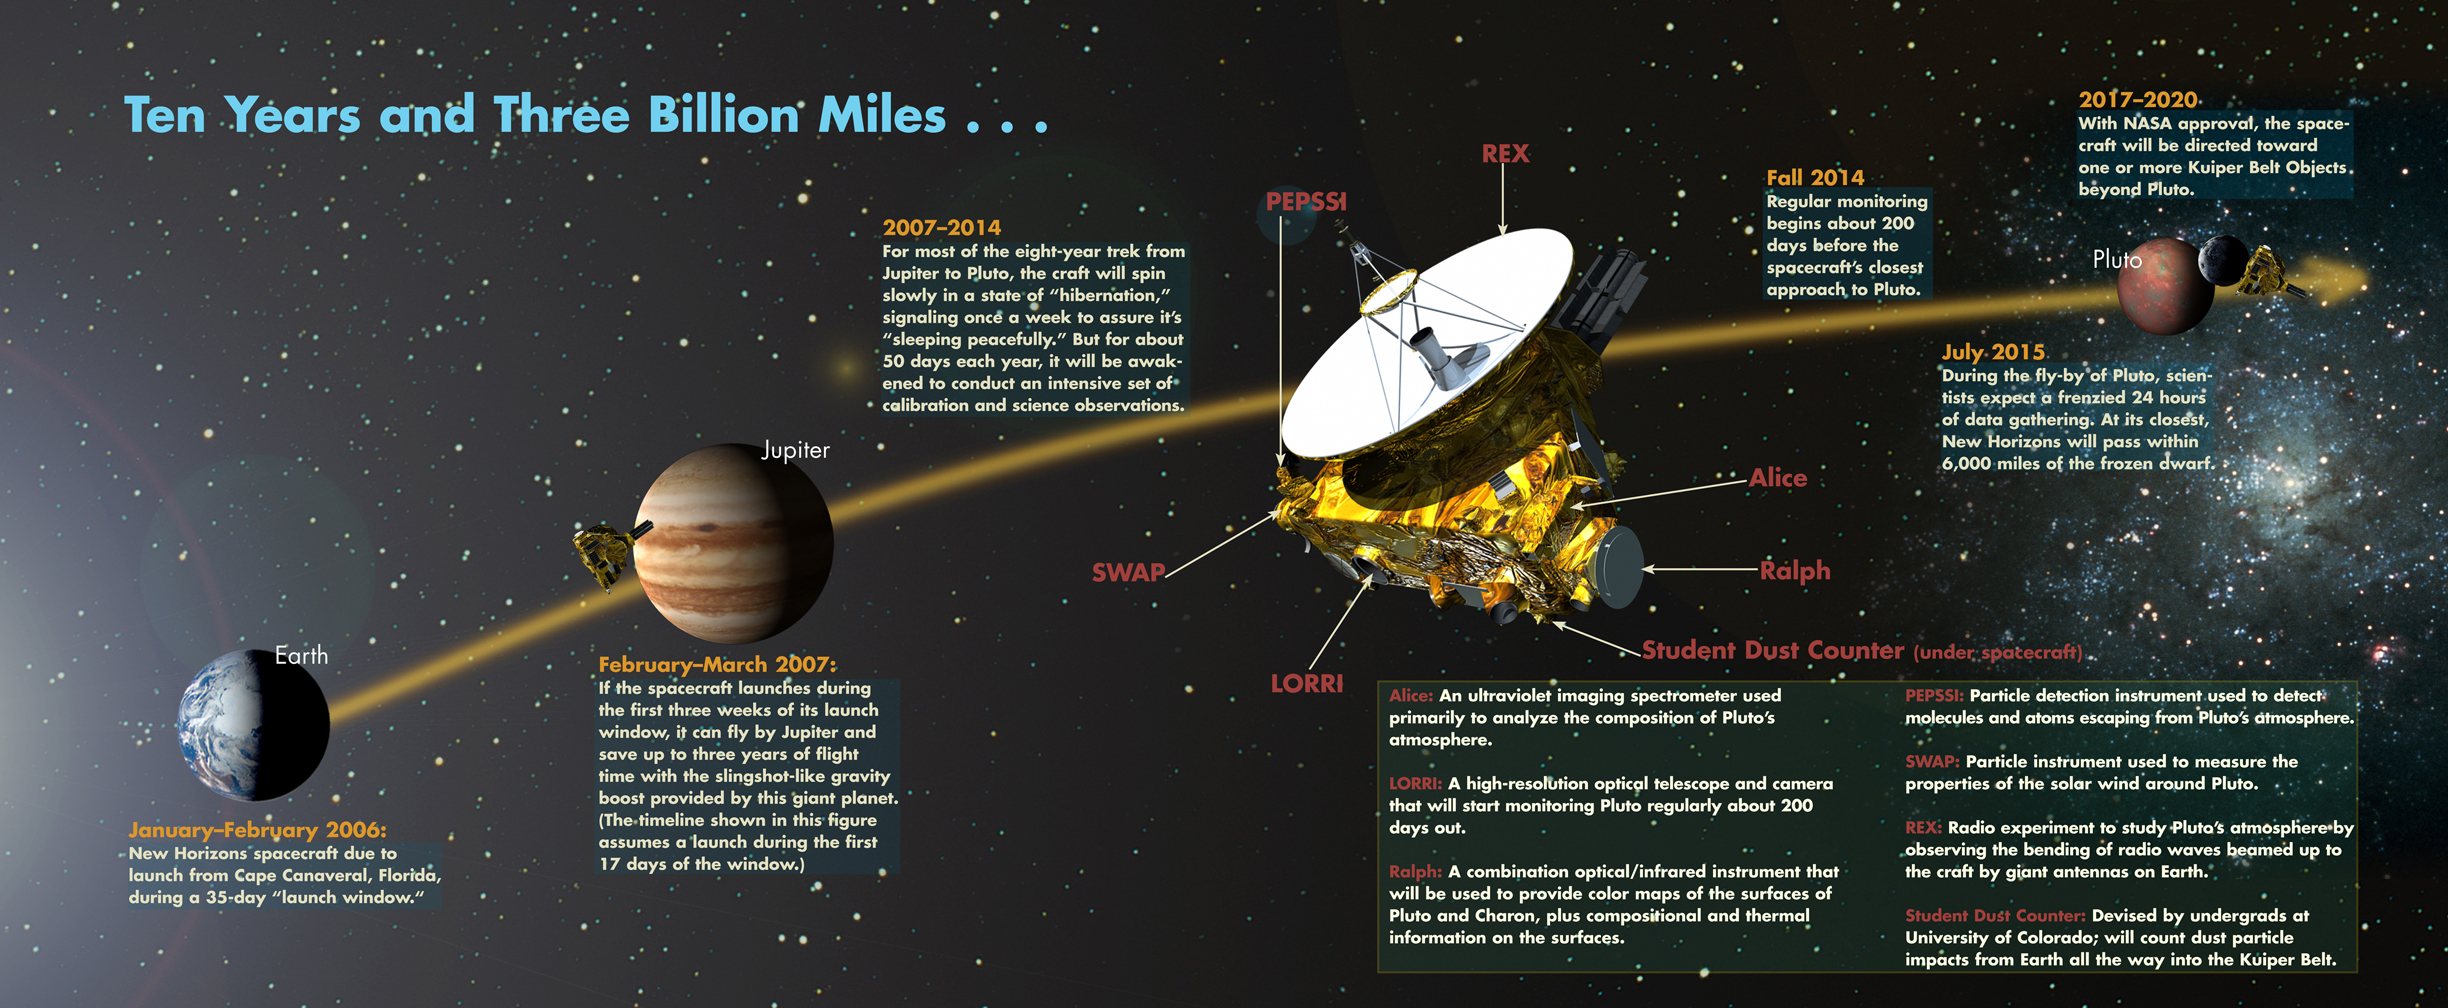 New Horizons Wakes Up: The Mission to Pluto Timeline